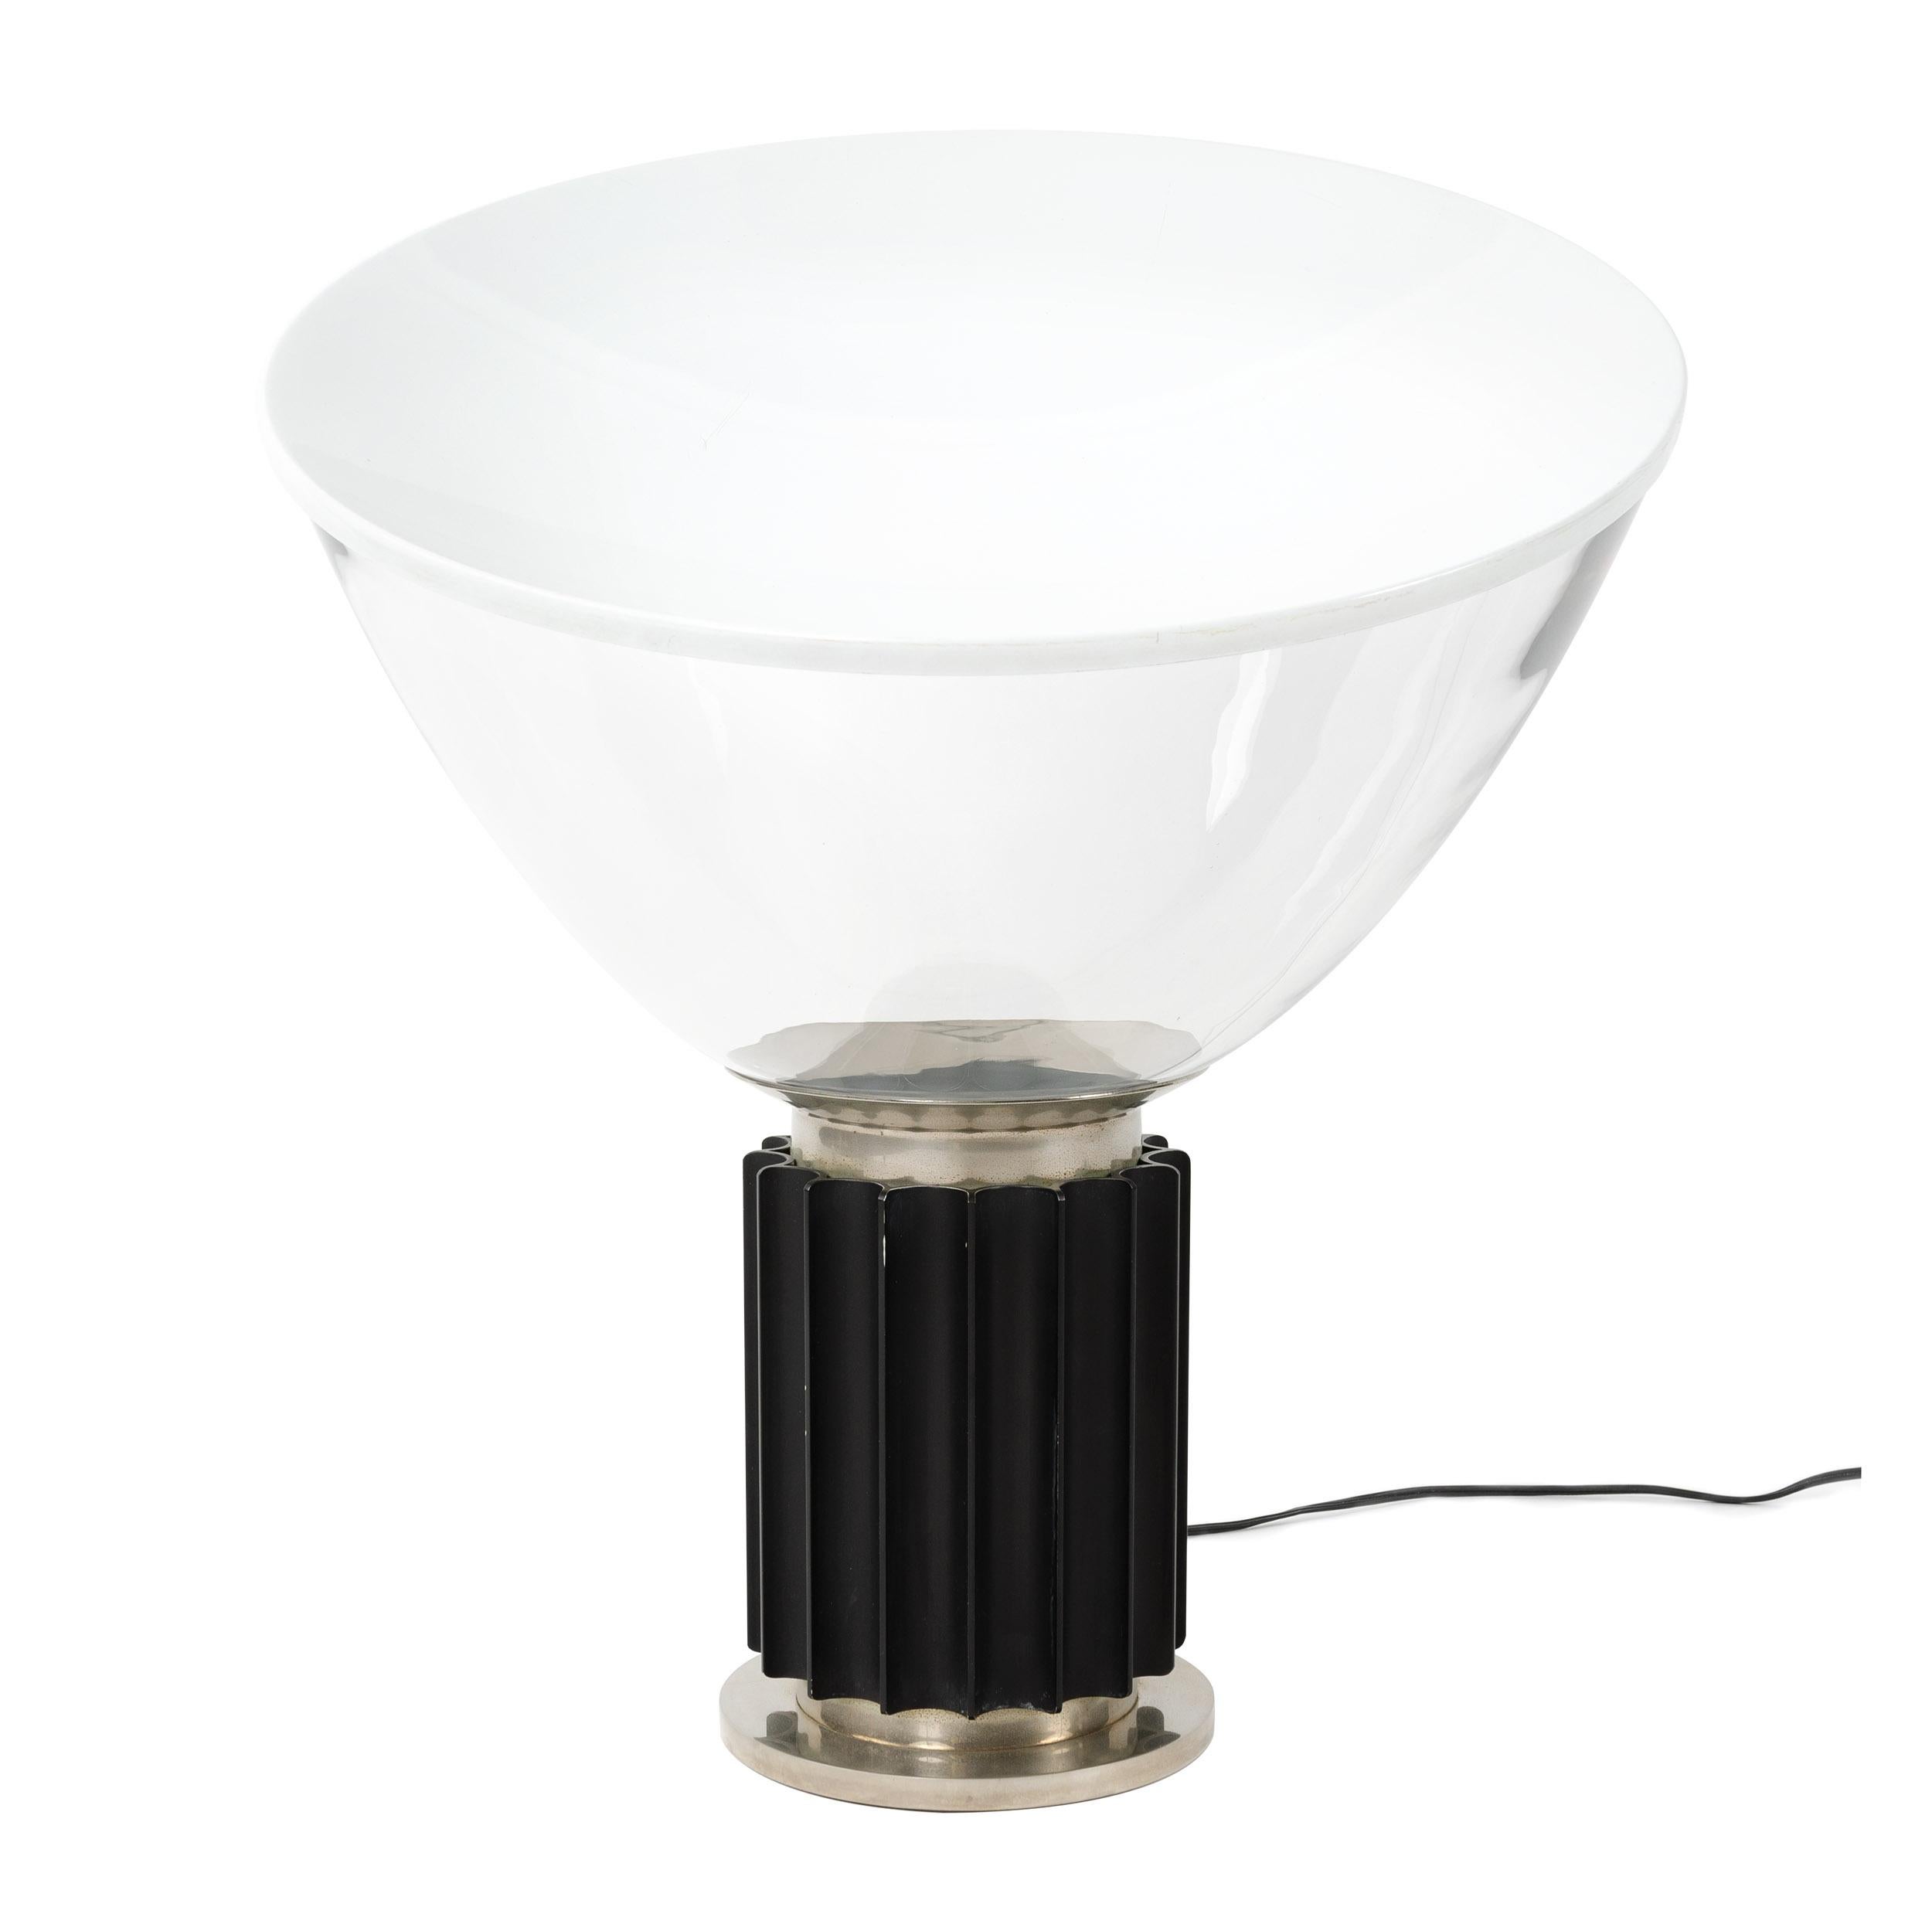 An Art Deco inspired table lamp in a timeless Mid-Century Modern shape. Designed by Achille and Pier Giacomo Castiglioni with a gearshift column and diffused concave, up-light in glass. Manufactured by Flos in the 1960s.